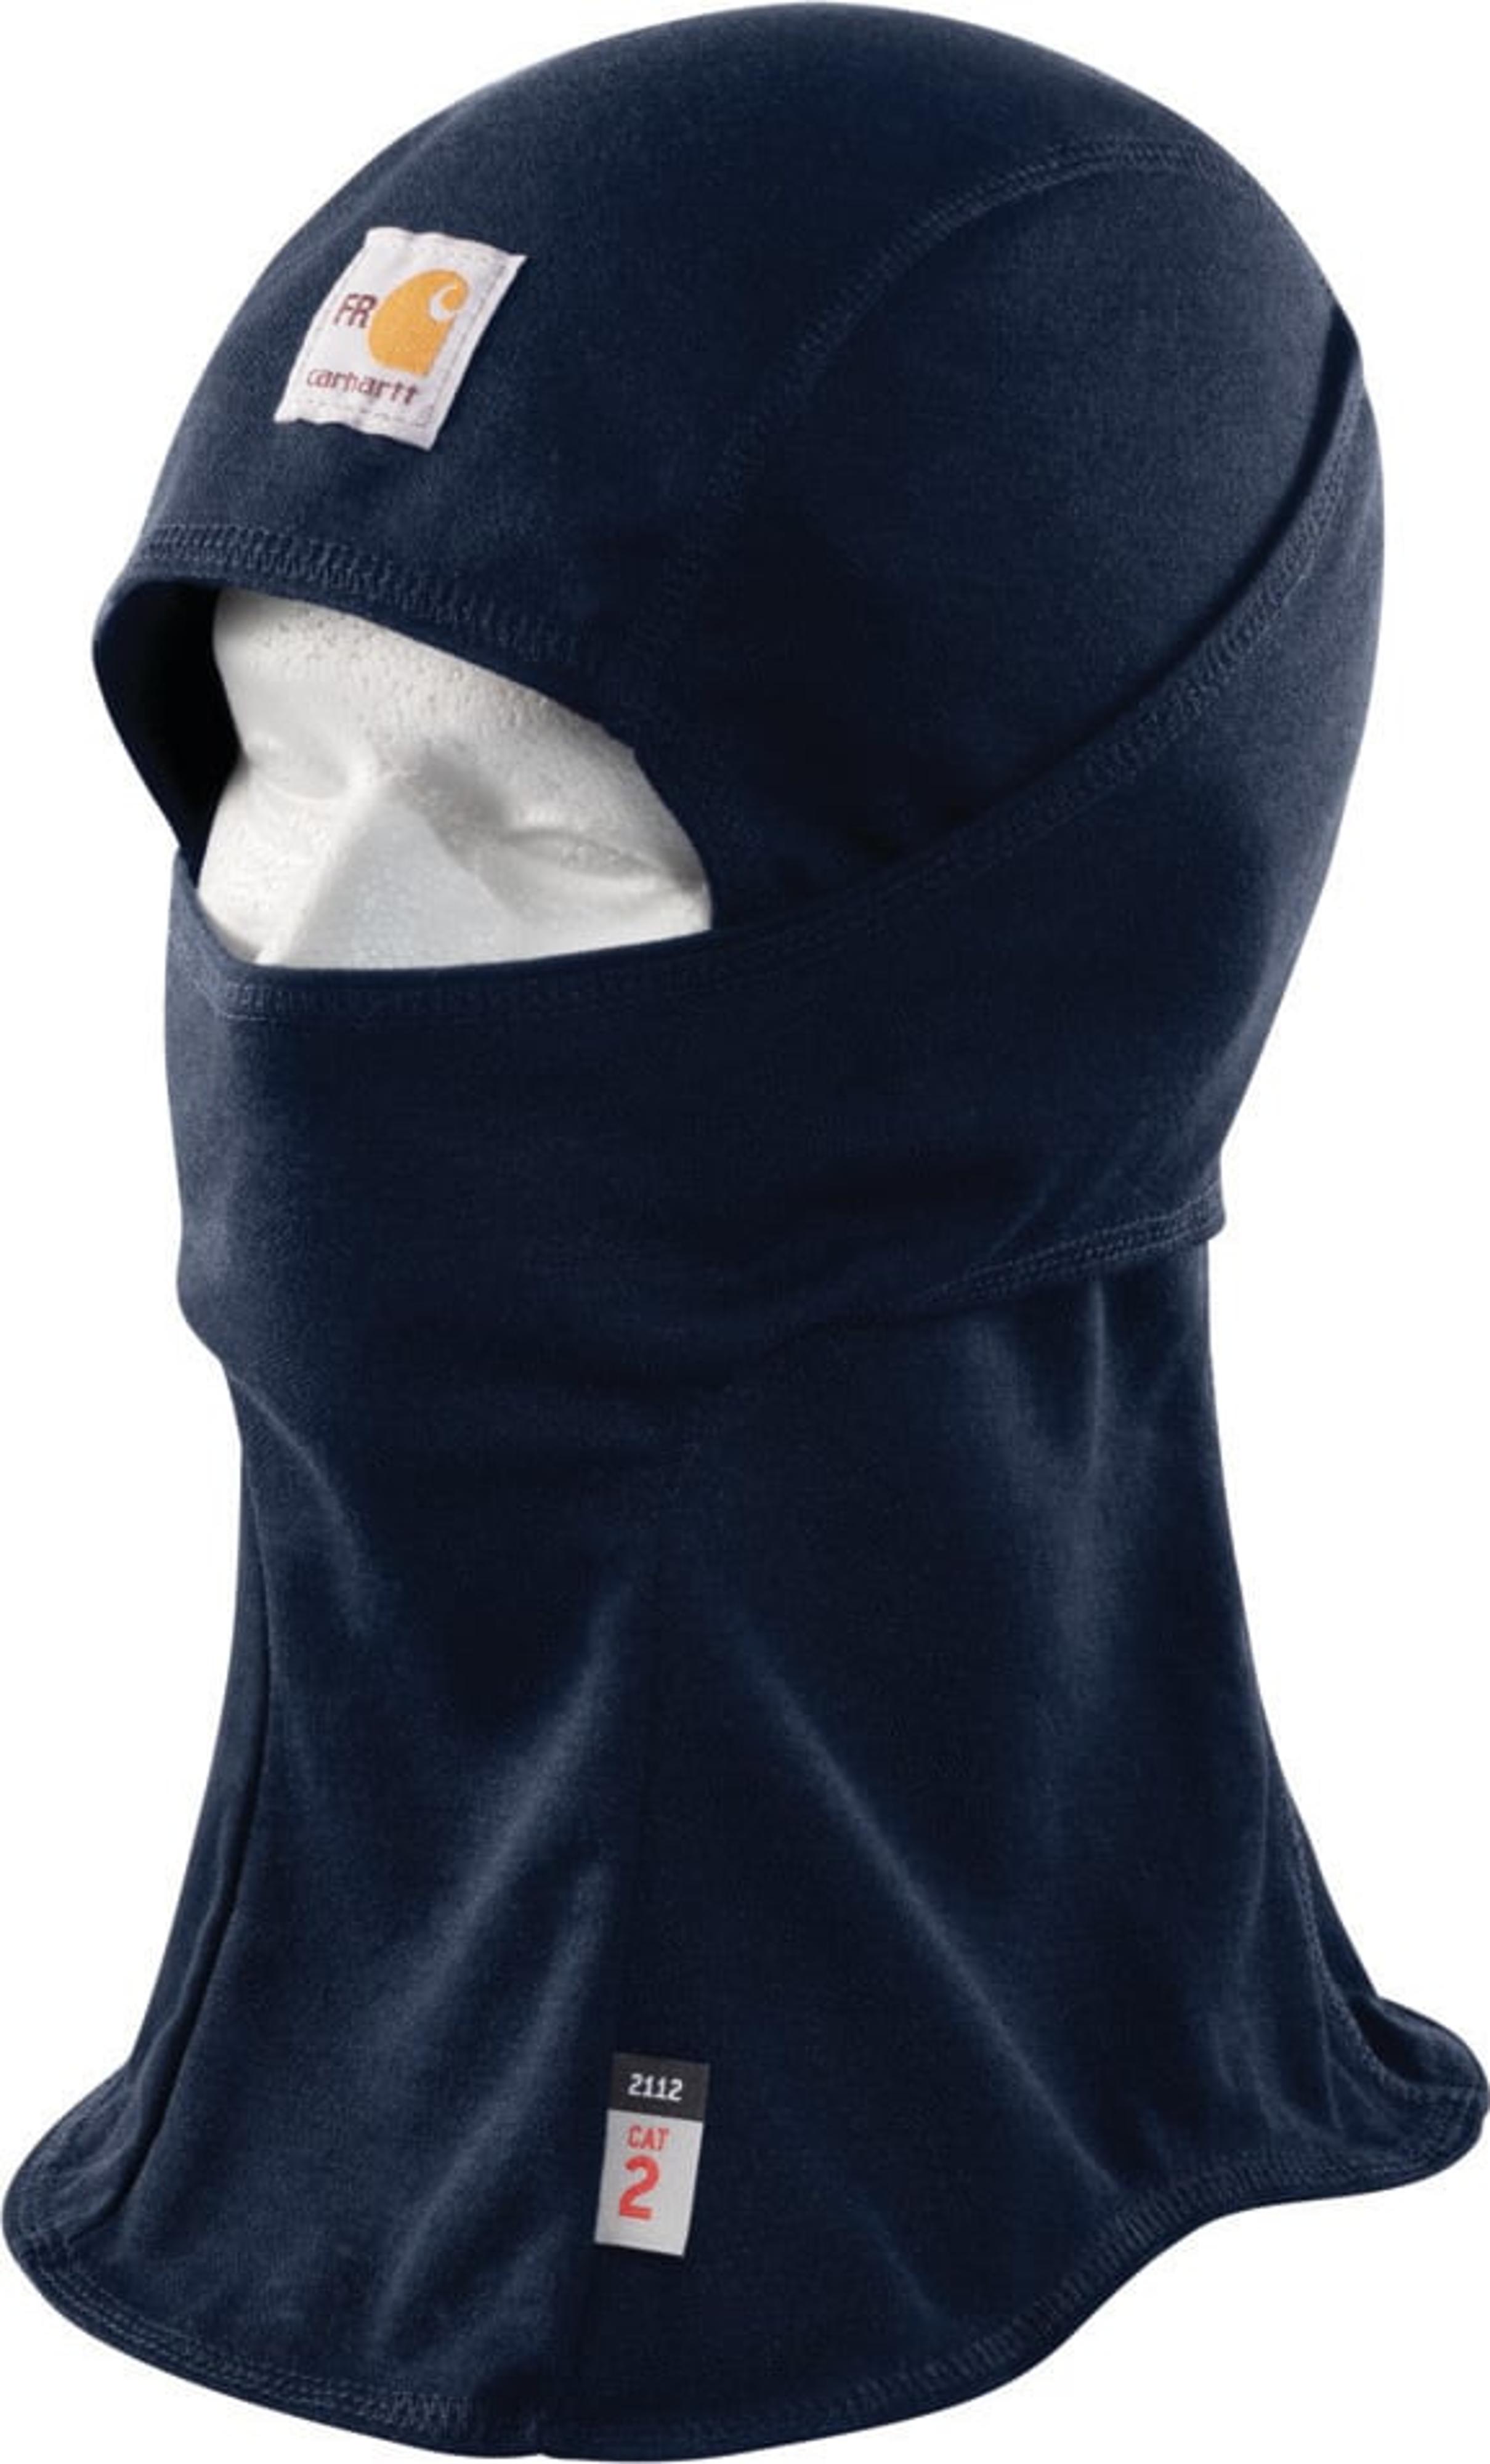 Carhartt FRA003DNY Dark Navy Flame-Resistant Double-Layer Force Balaclava